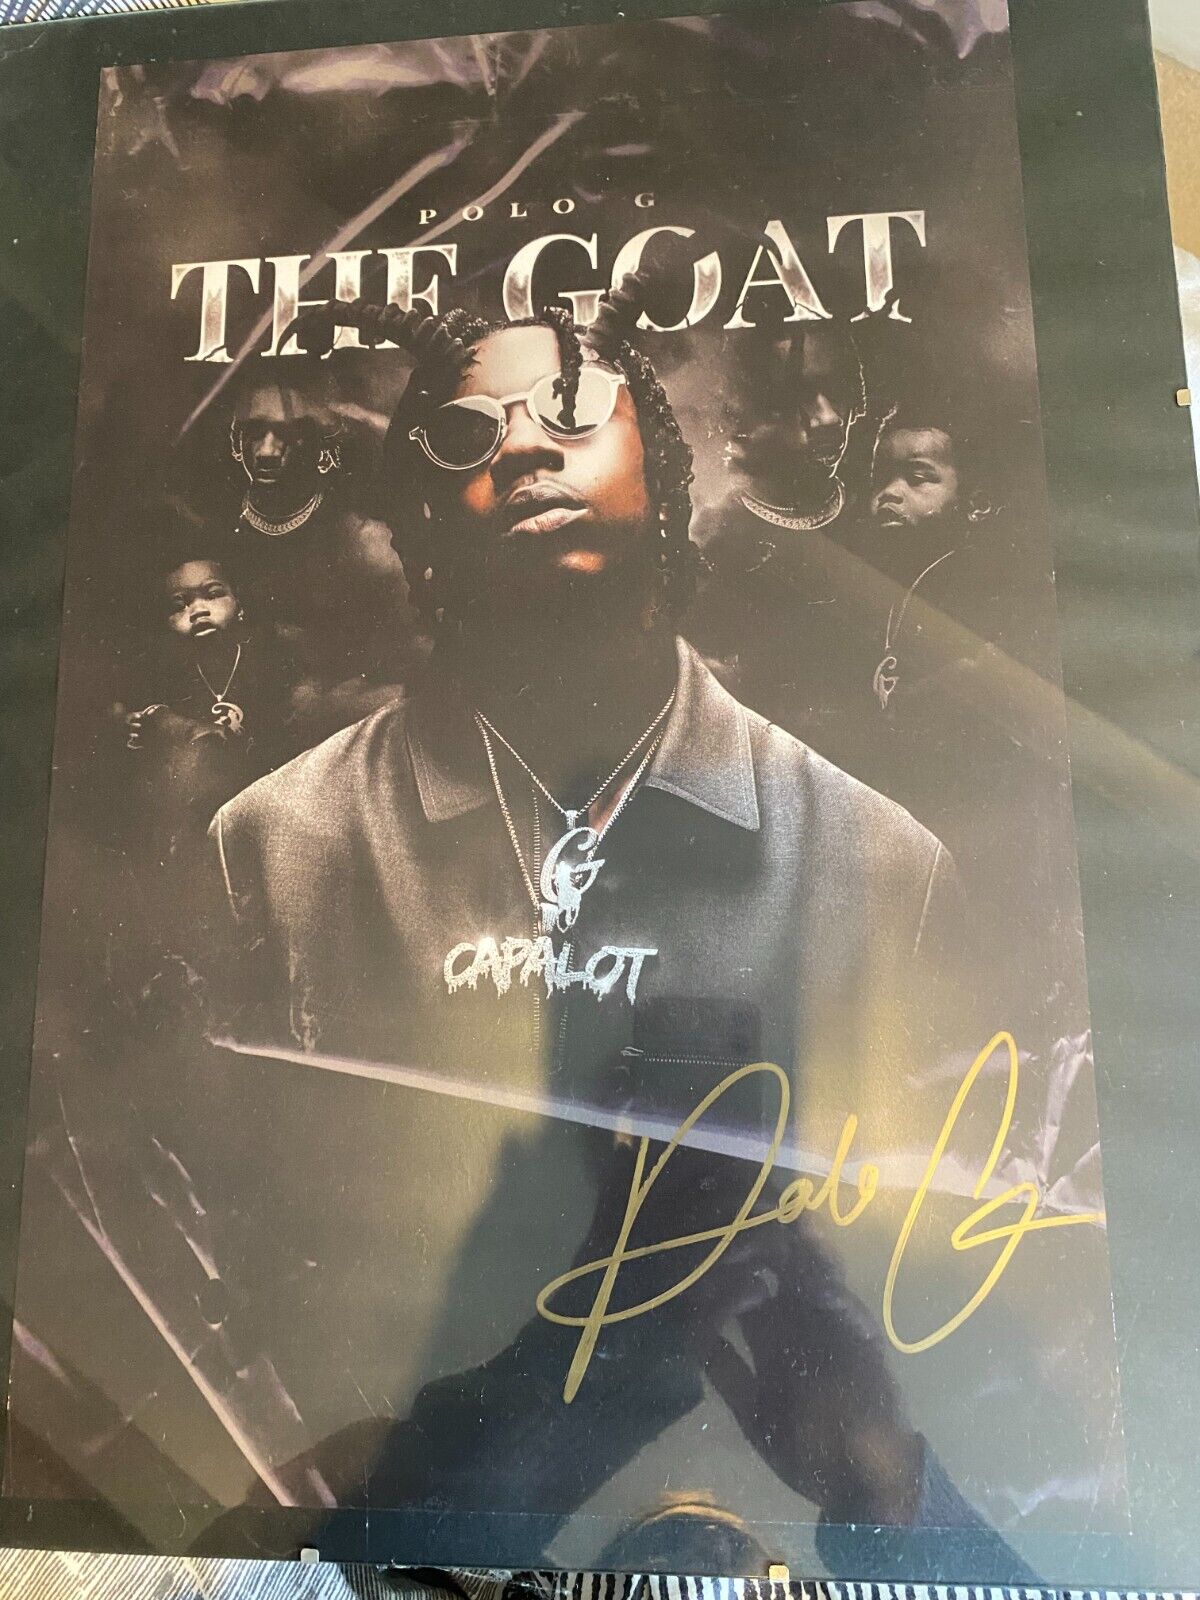 Polo G The Goat Signed Poster 12x18 Glass Framed Autographed With Receipt 